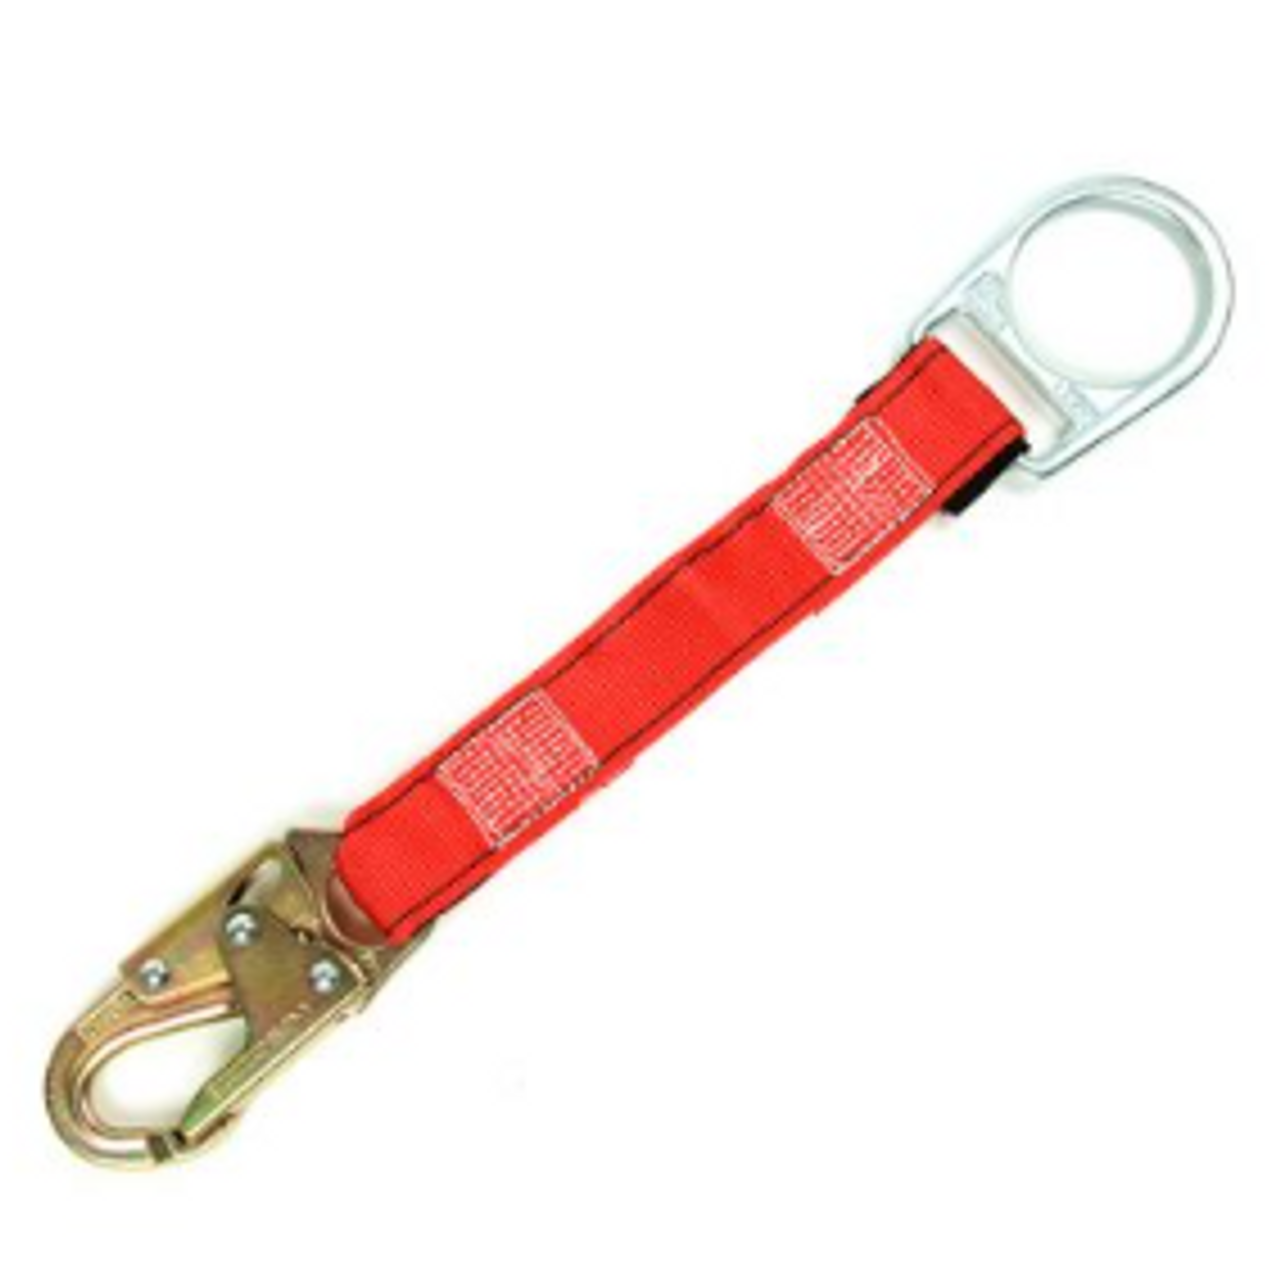  

Materials: Polyester (rope) & Steel (hook)
Hook opening: 21mm (0.78’’)
Rings: 55mm (2.17”)
Length: 51cm (20'')
Standards: CSA Z259 11 5